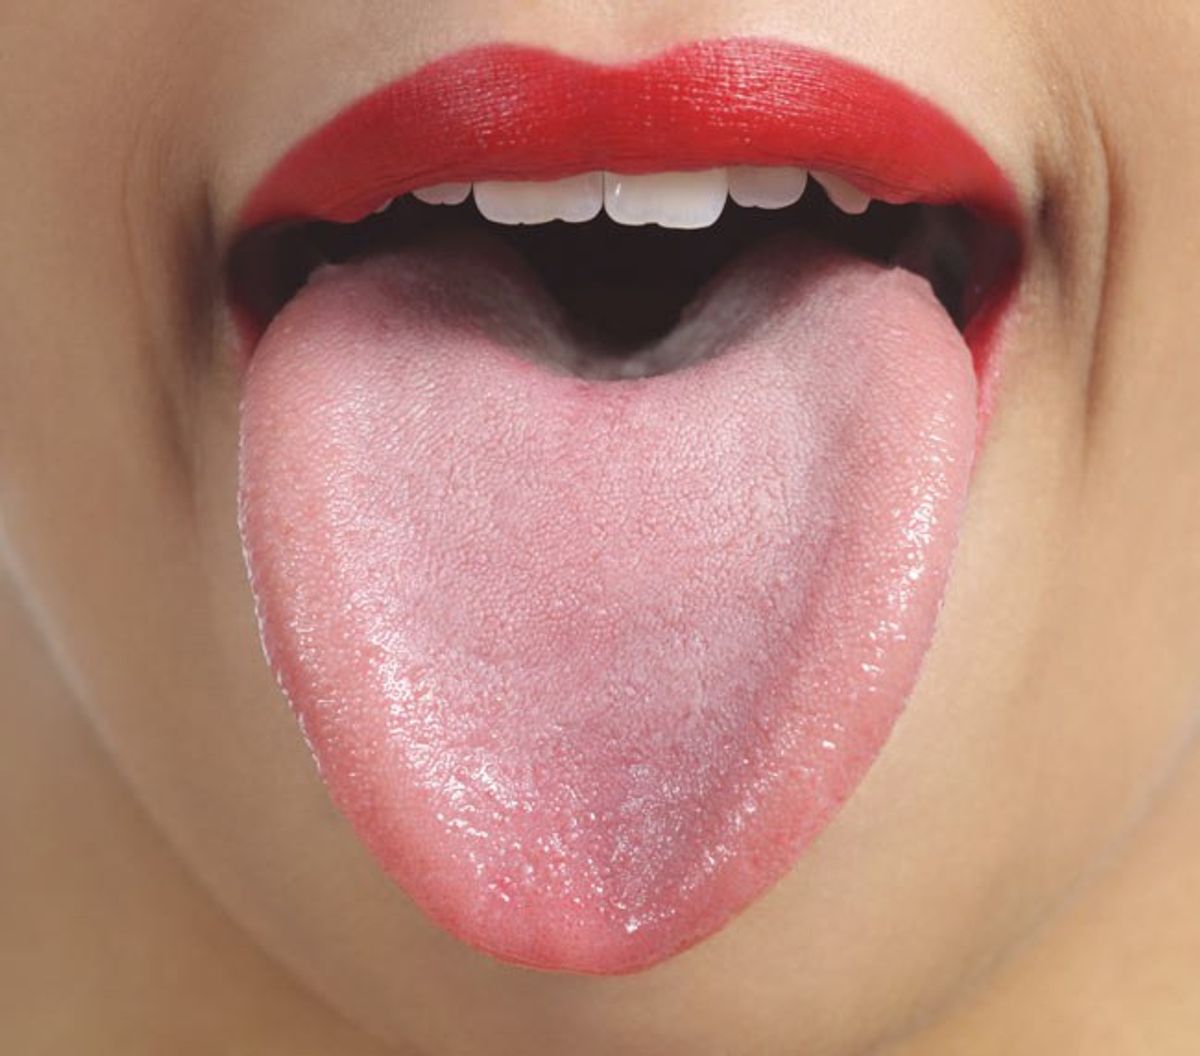 Living With Geographic Tongue